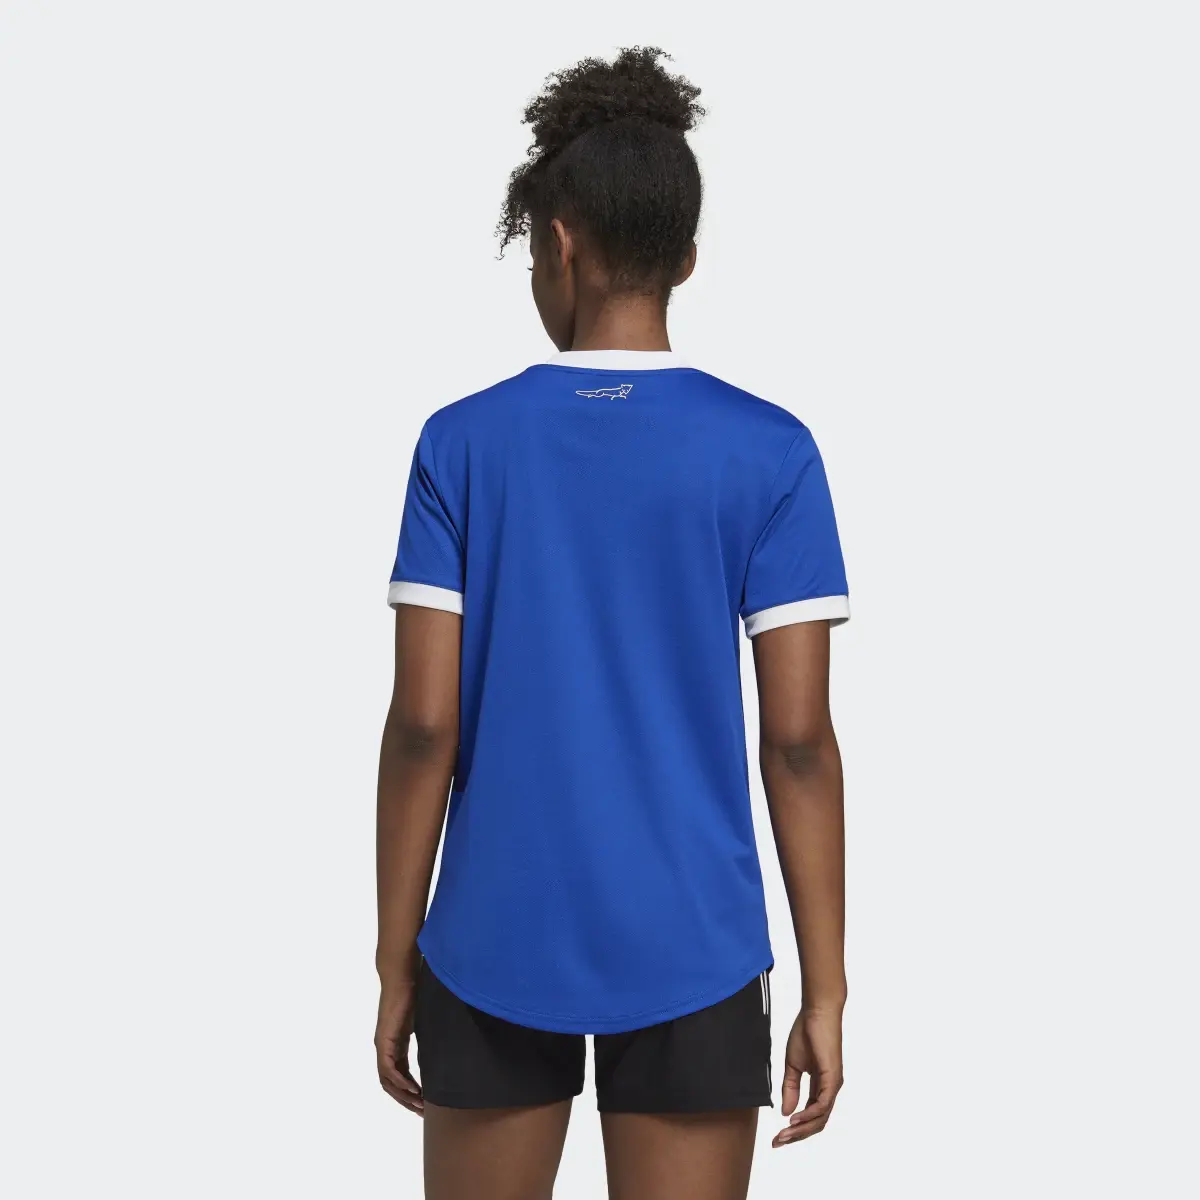 Adidas Leicester City FC 22/23 Home Jersey. 3